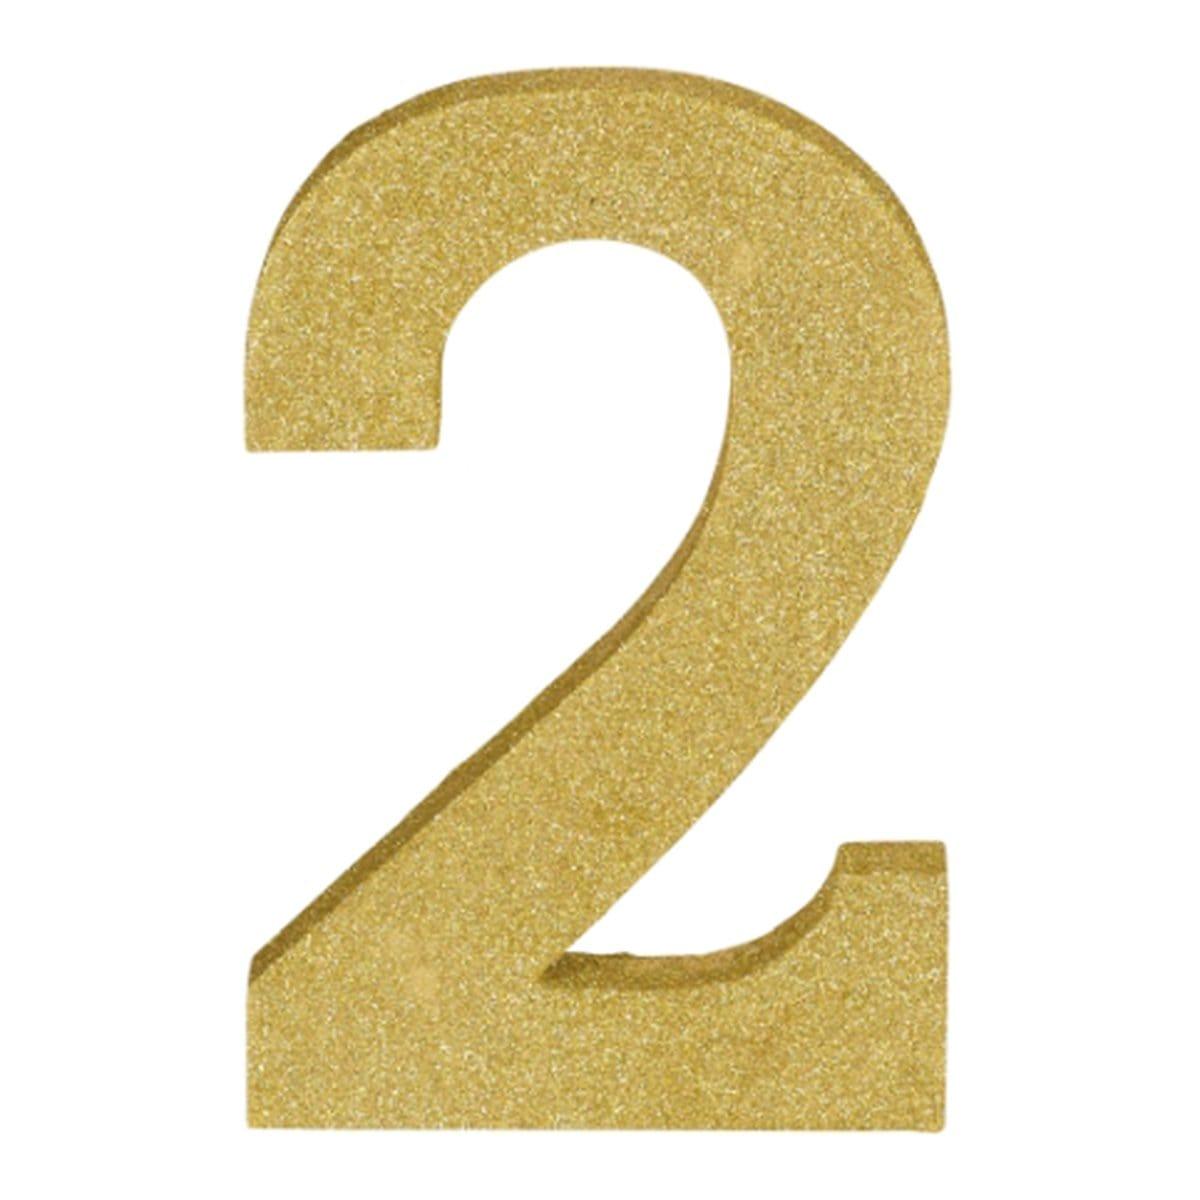 Buy Decorations Gold Glitter Number - 2 sold at Party Expert